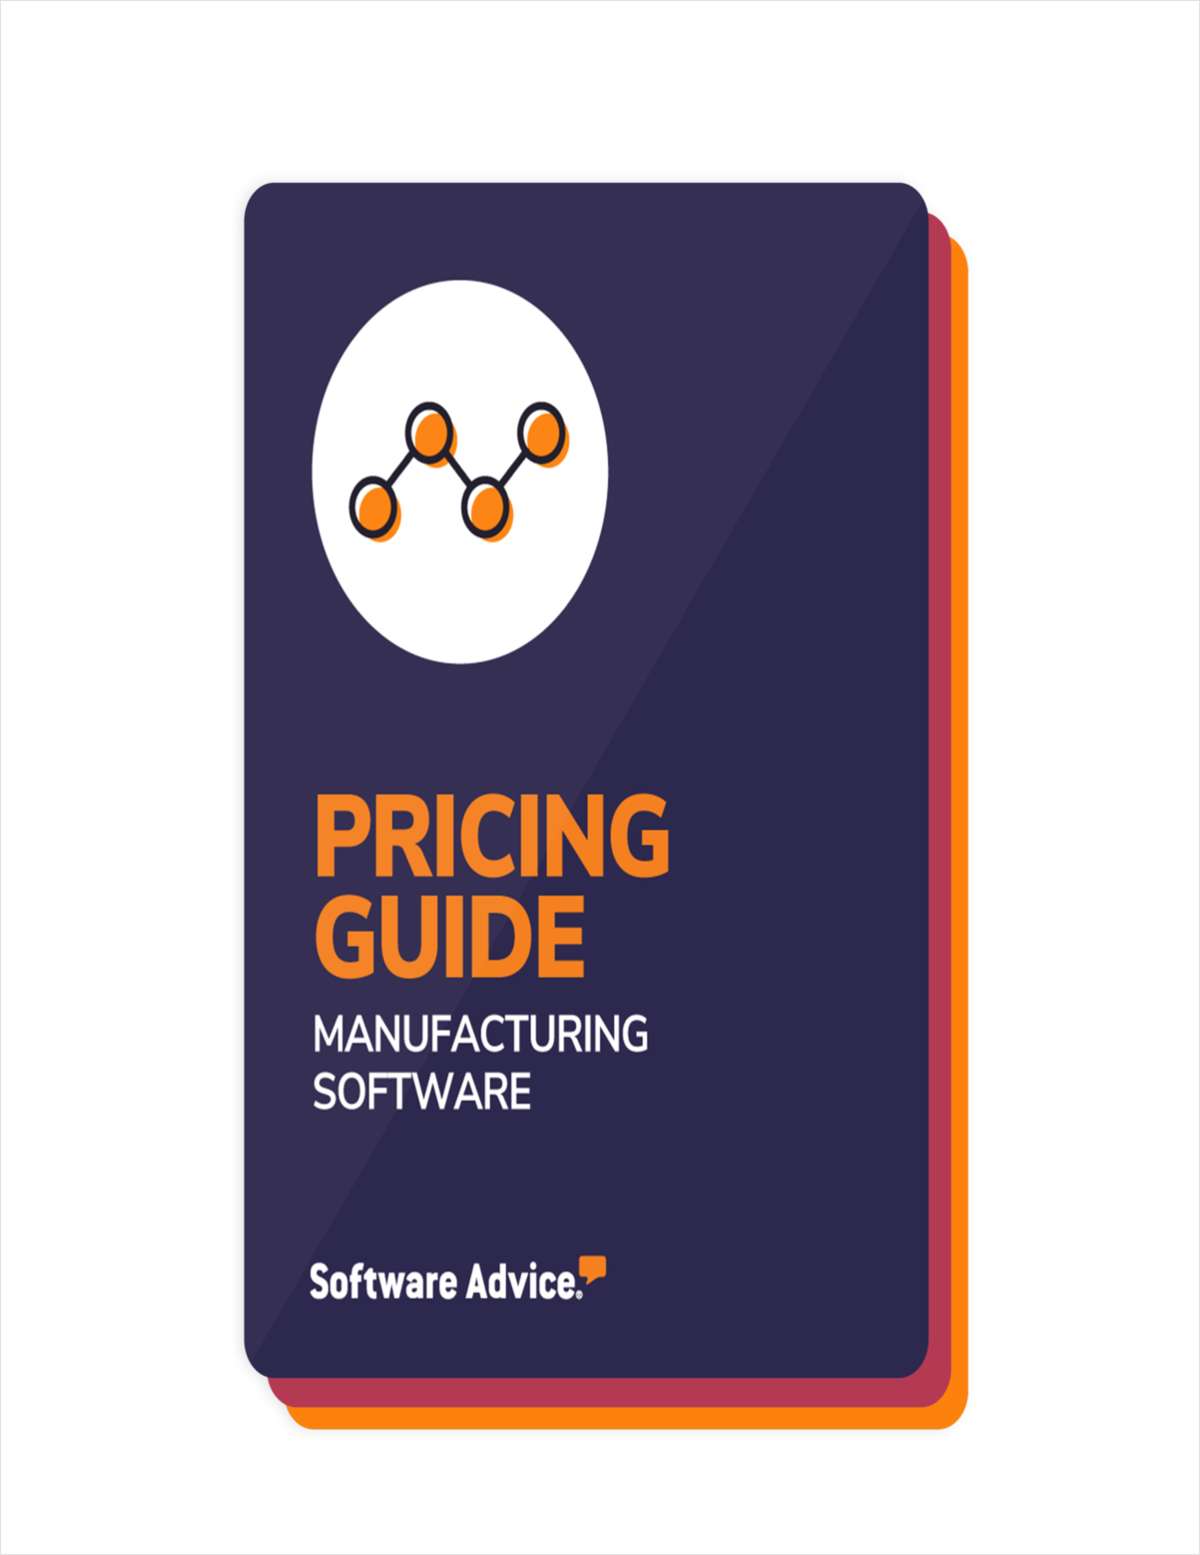 New for 2023: Software Advice's Manufacturing Software Pricing Guide